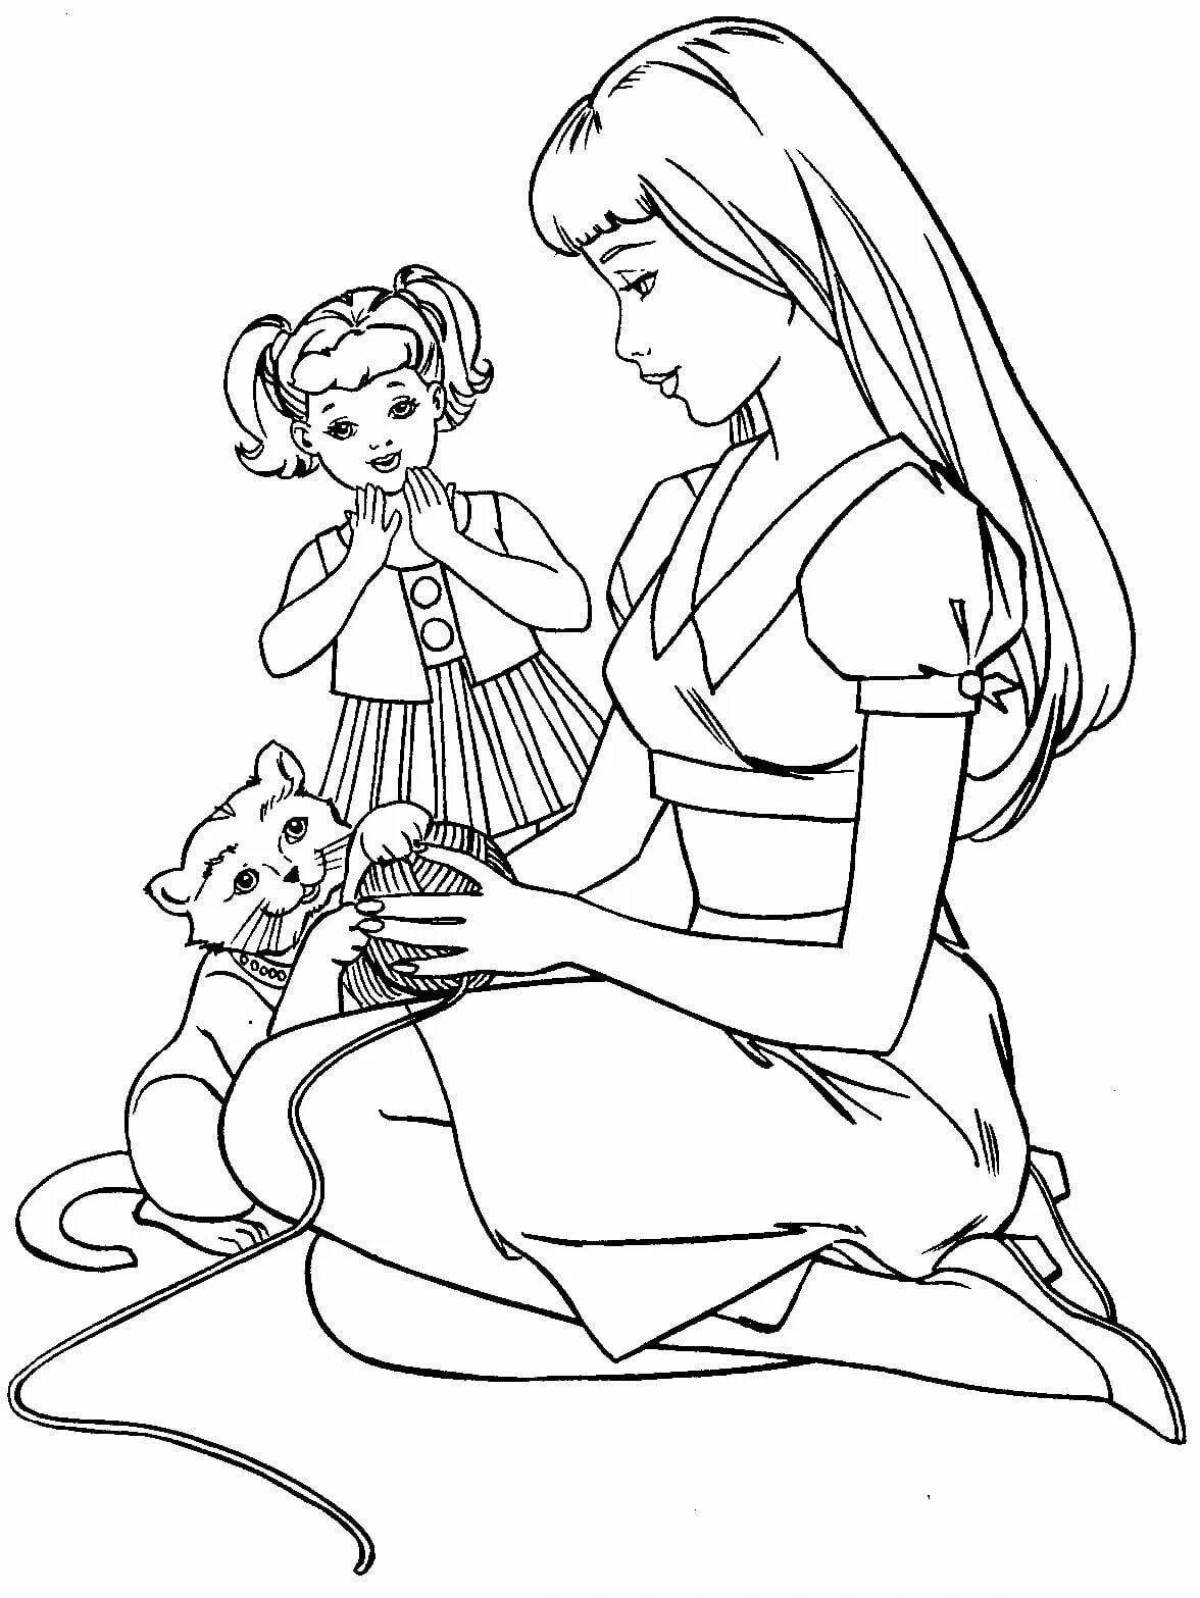 Coloring page happy mom and baby